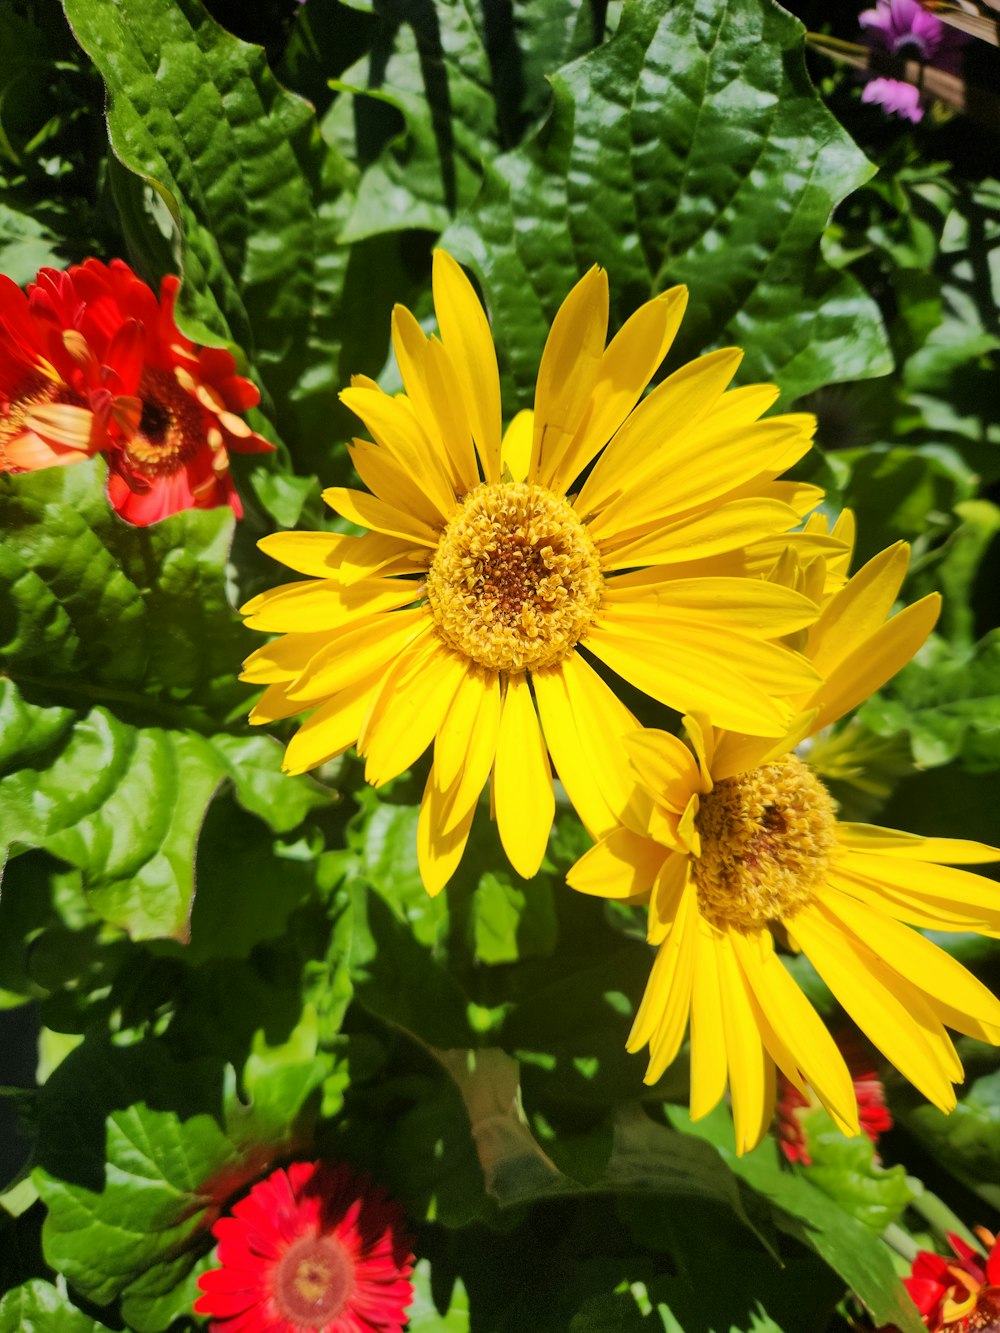 a close up of a yellow flower surrounded by other flowers